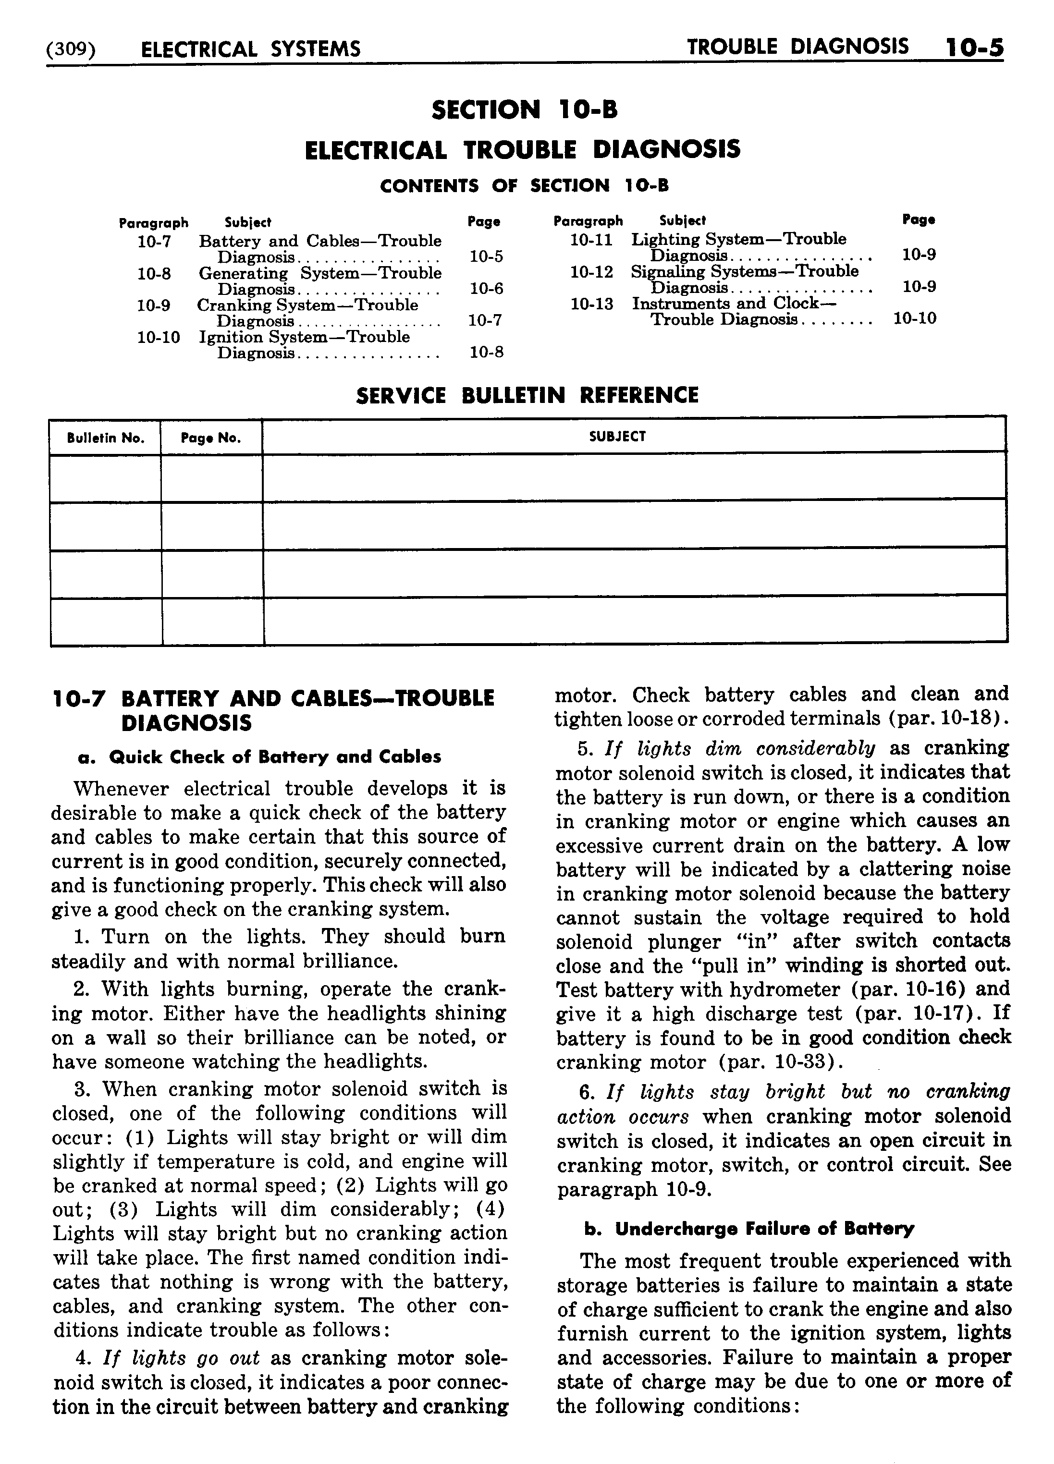 n_11 1955 Buick Shop Manual - Electrical Systems-005-005.jpg